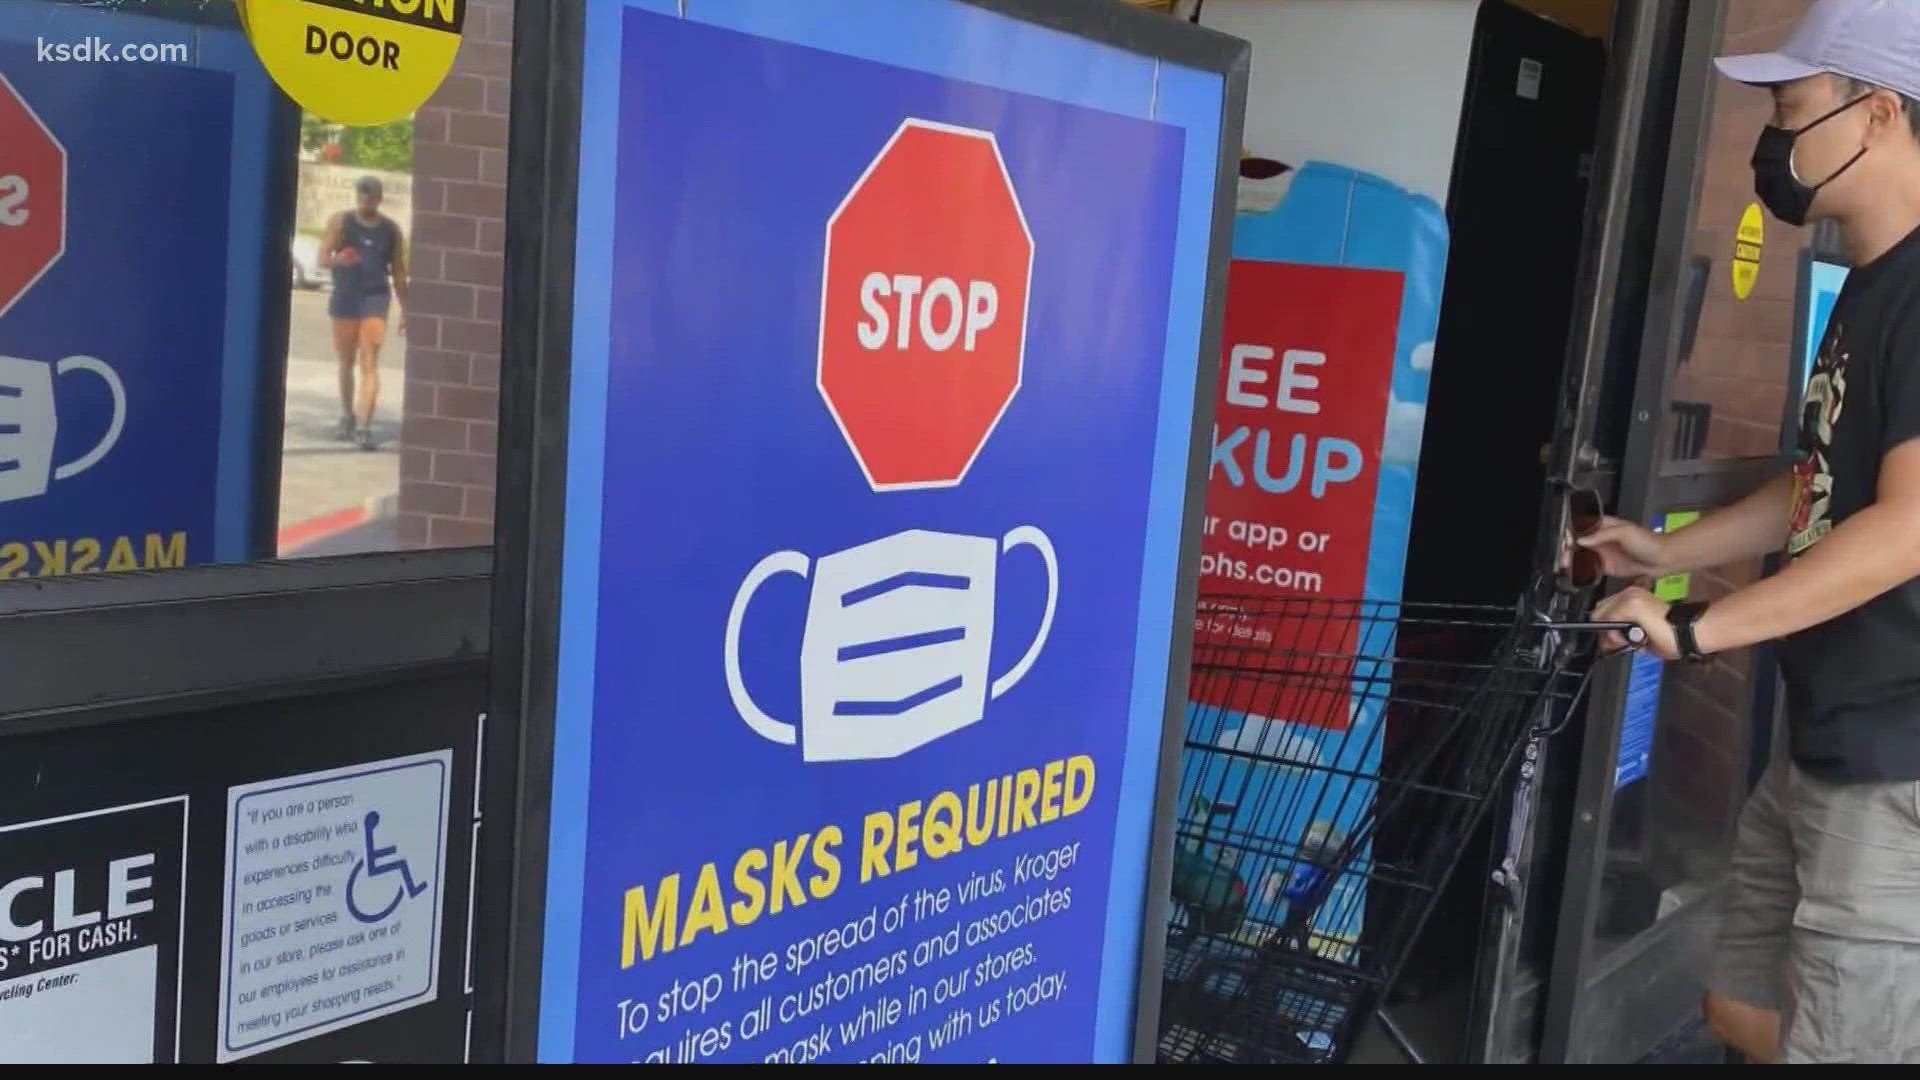 People will be required to wear masks in indoor public places